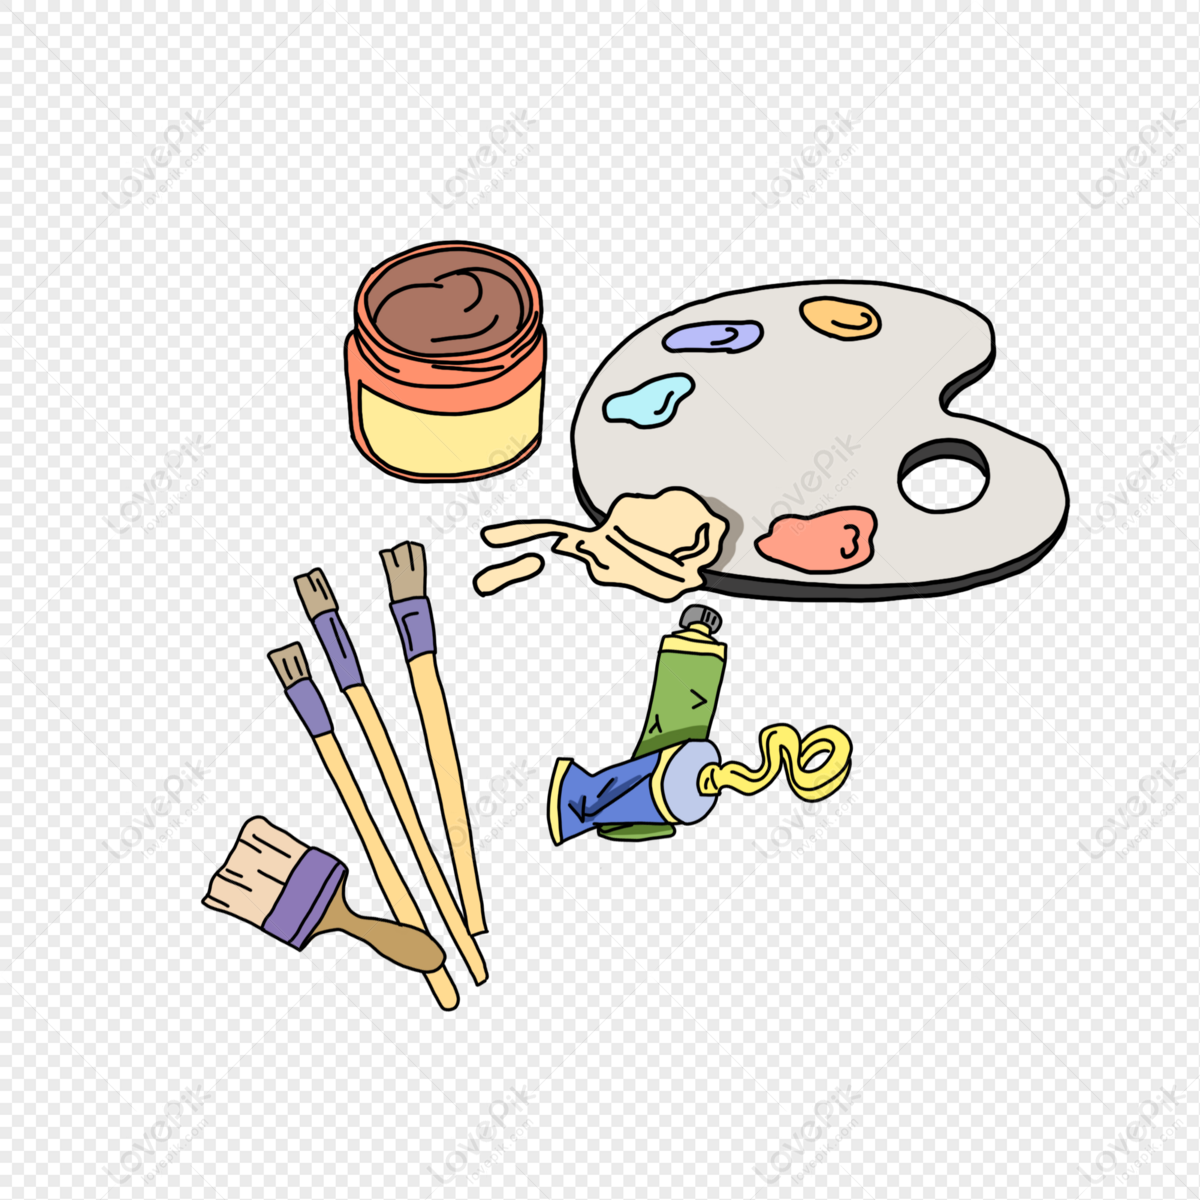 Art Supplies PNG Transparent Background And Clipart Image For Free Download  - Lovepik | 401445540